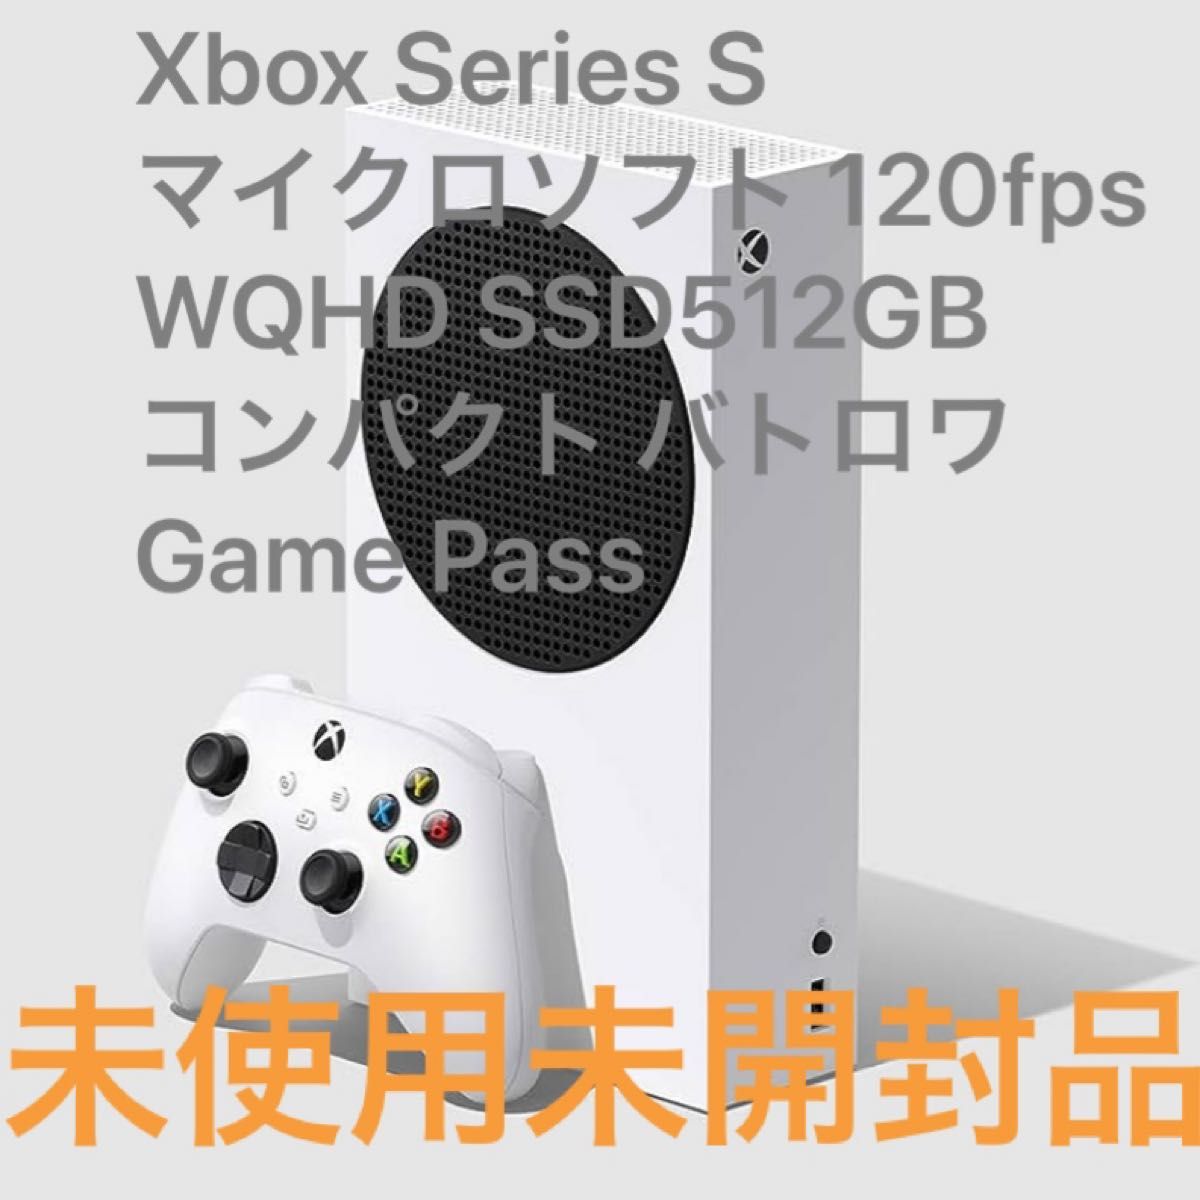 Xbox Series S マイクロソフト 120fps WQHD SSD512GB コンパクト バトロワ Game Pass